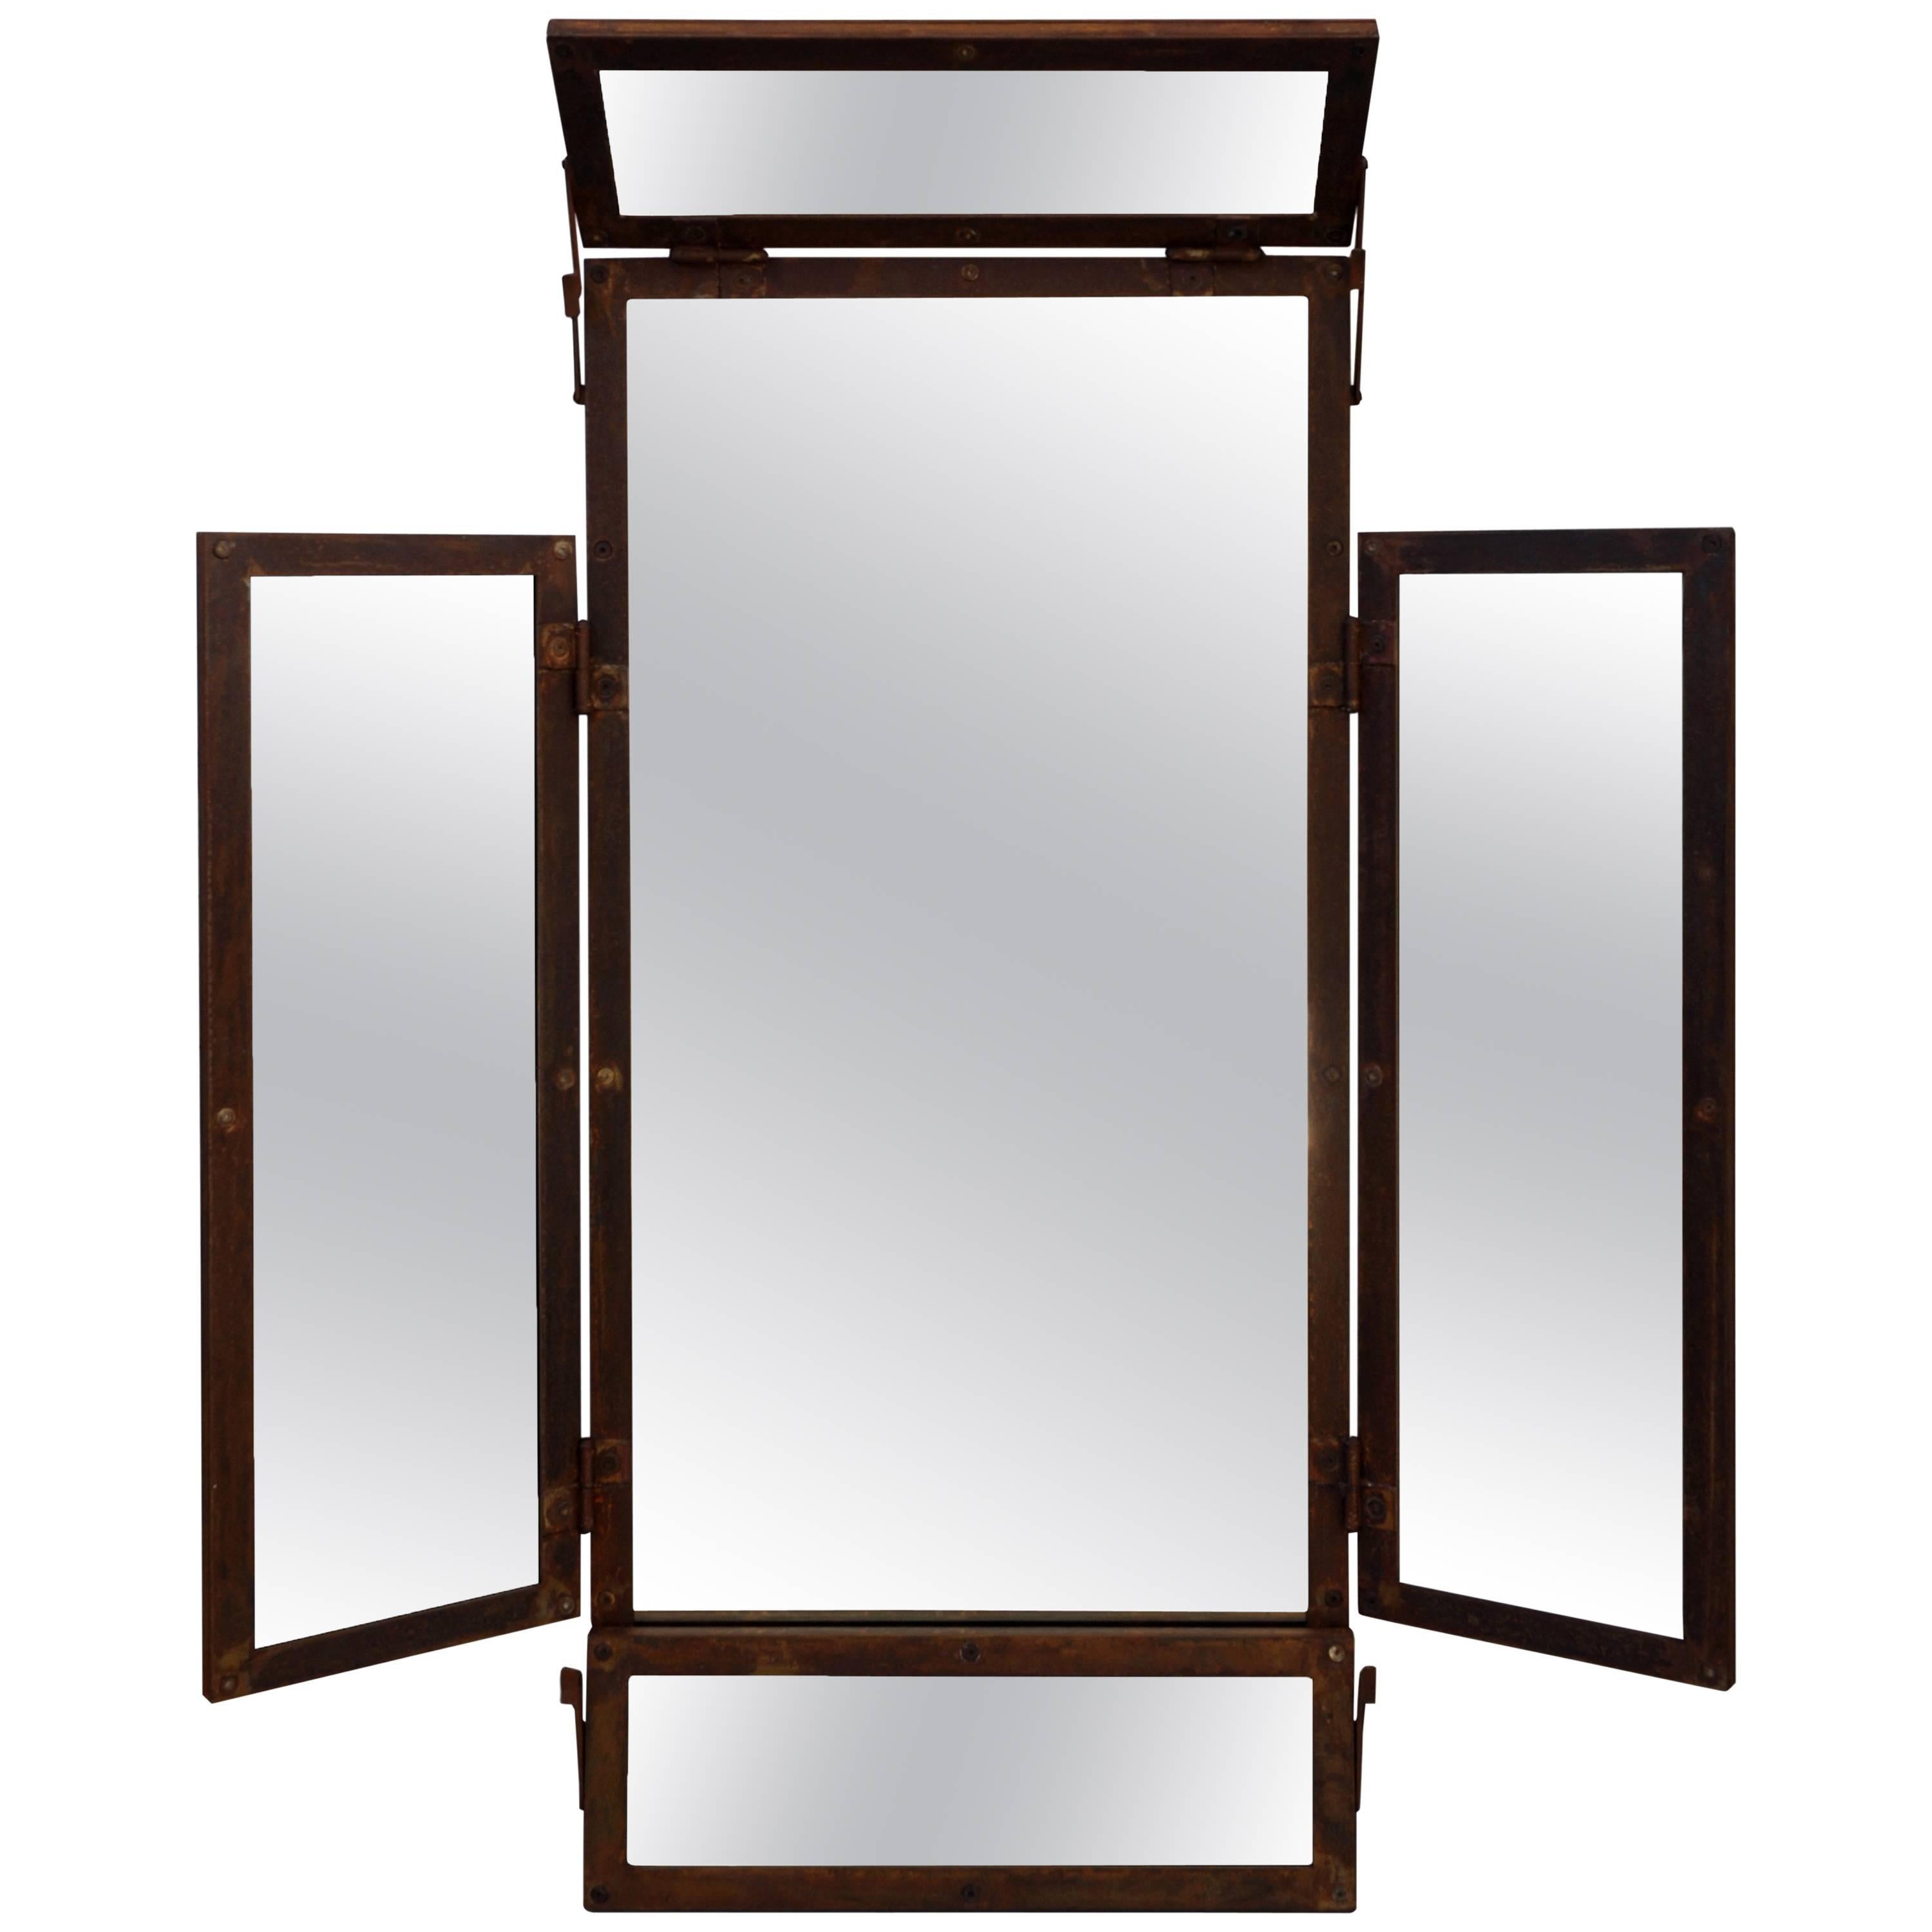 Large Industrial-Style Mirror in Locally Sourced Oxidized Italian Steel